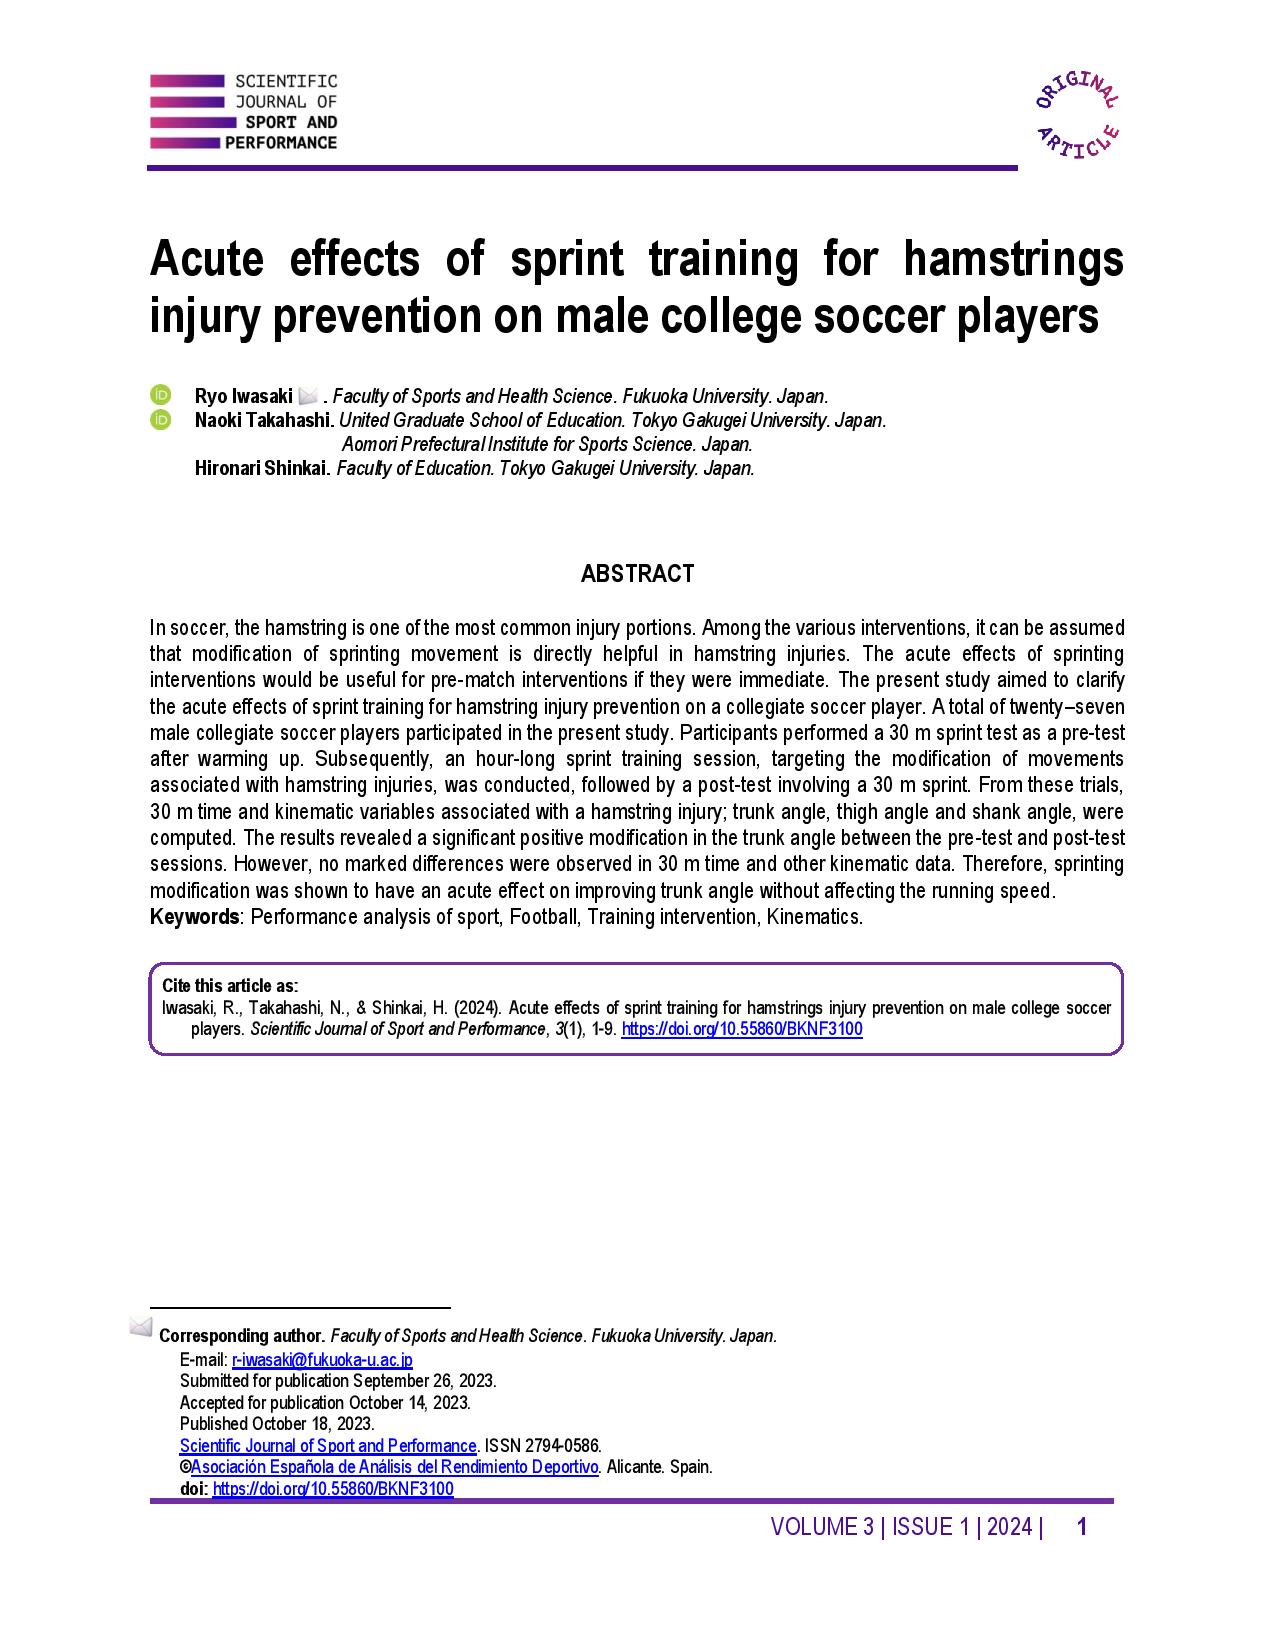 Acute effects of sprint training for hamstrings injury prevention on male college soccer players